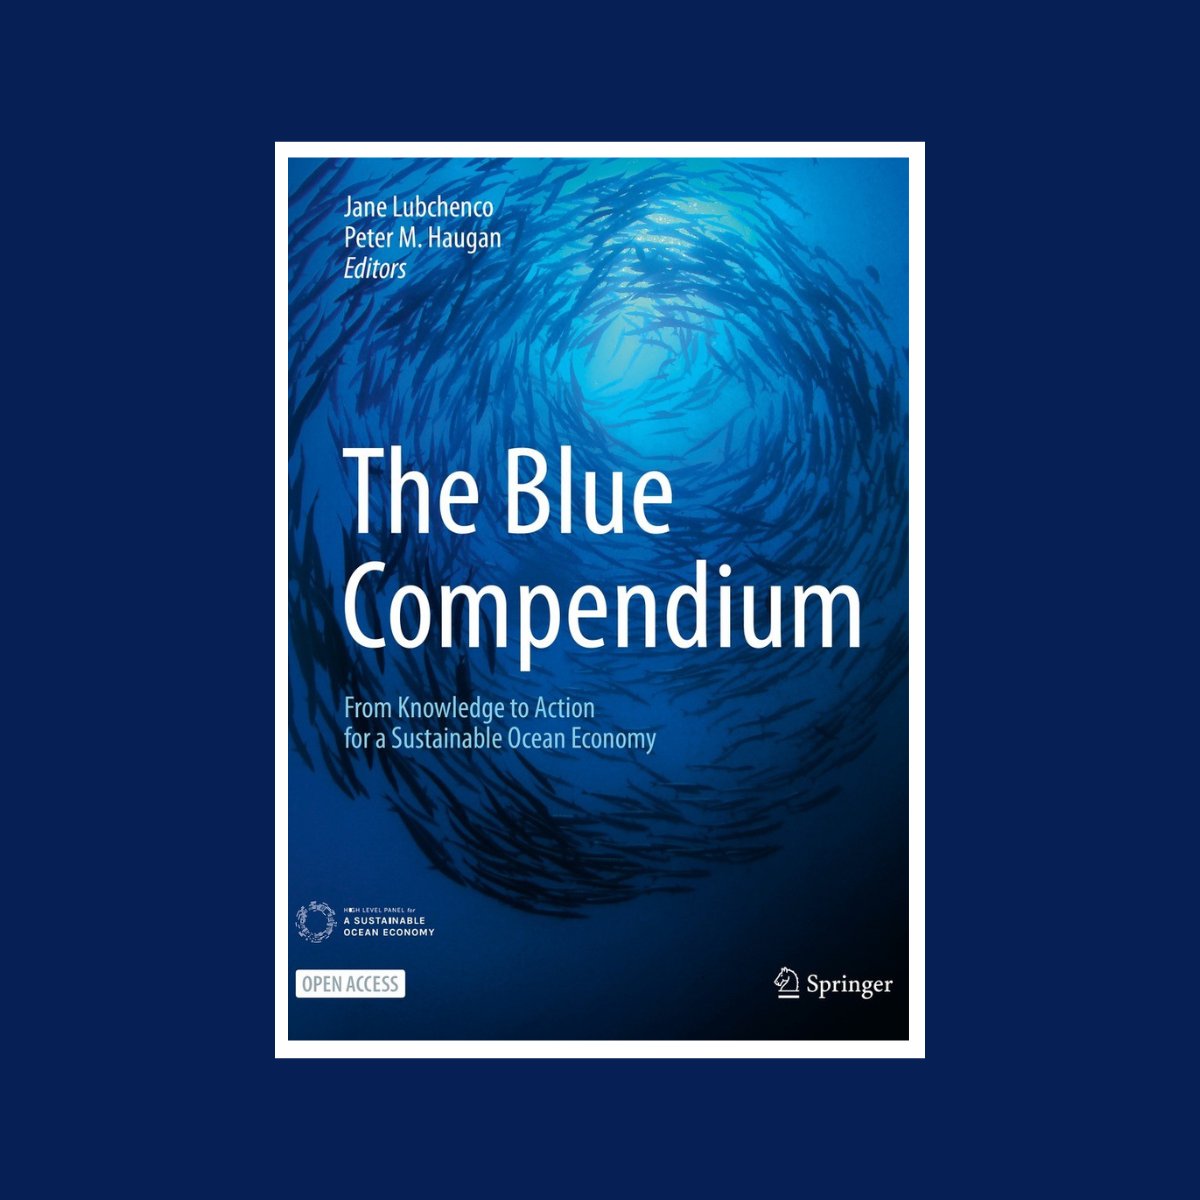 In today's sea of information, it's a relief to find a reliable source to hold on to - cue The Blue Compendium.

📖 This thorough collection inclues a wide range of enlightening assessments and reports on innovative #oceansolutions in technology, policy, governance, and #finance.